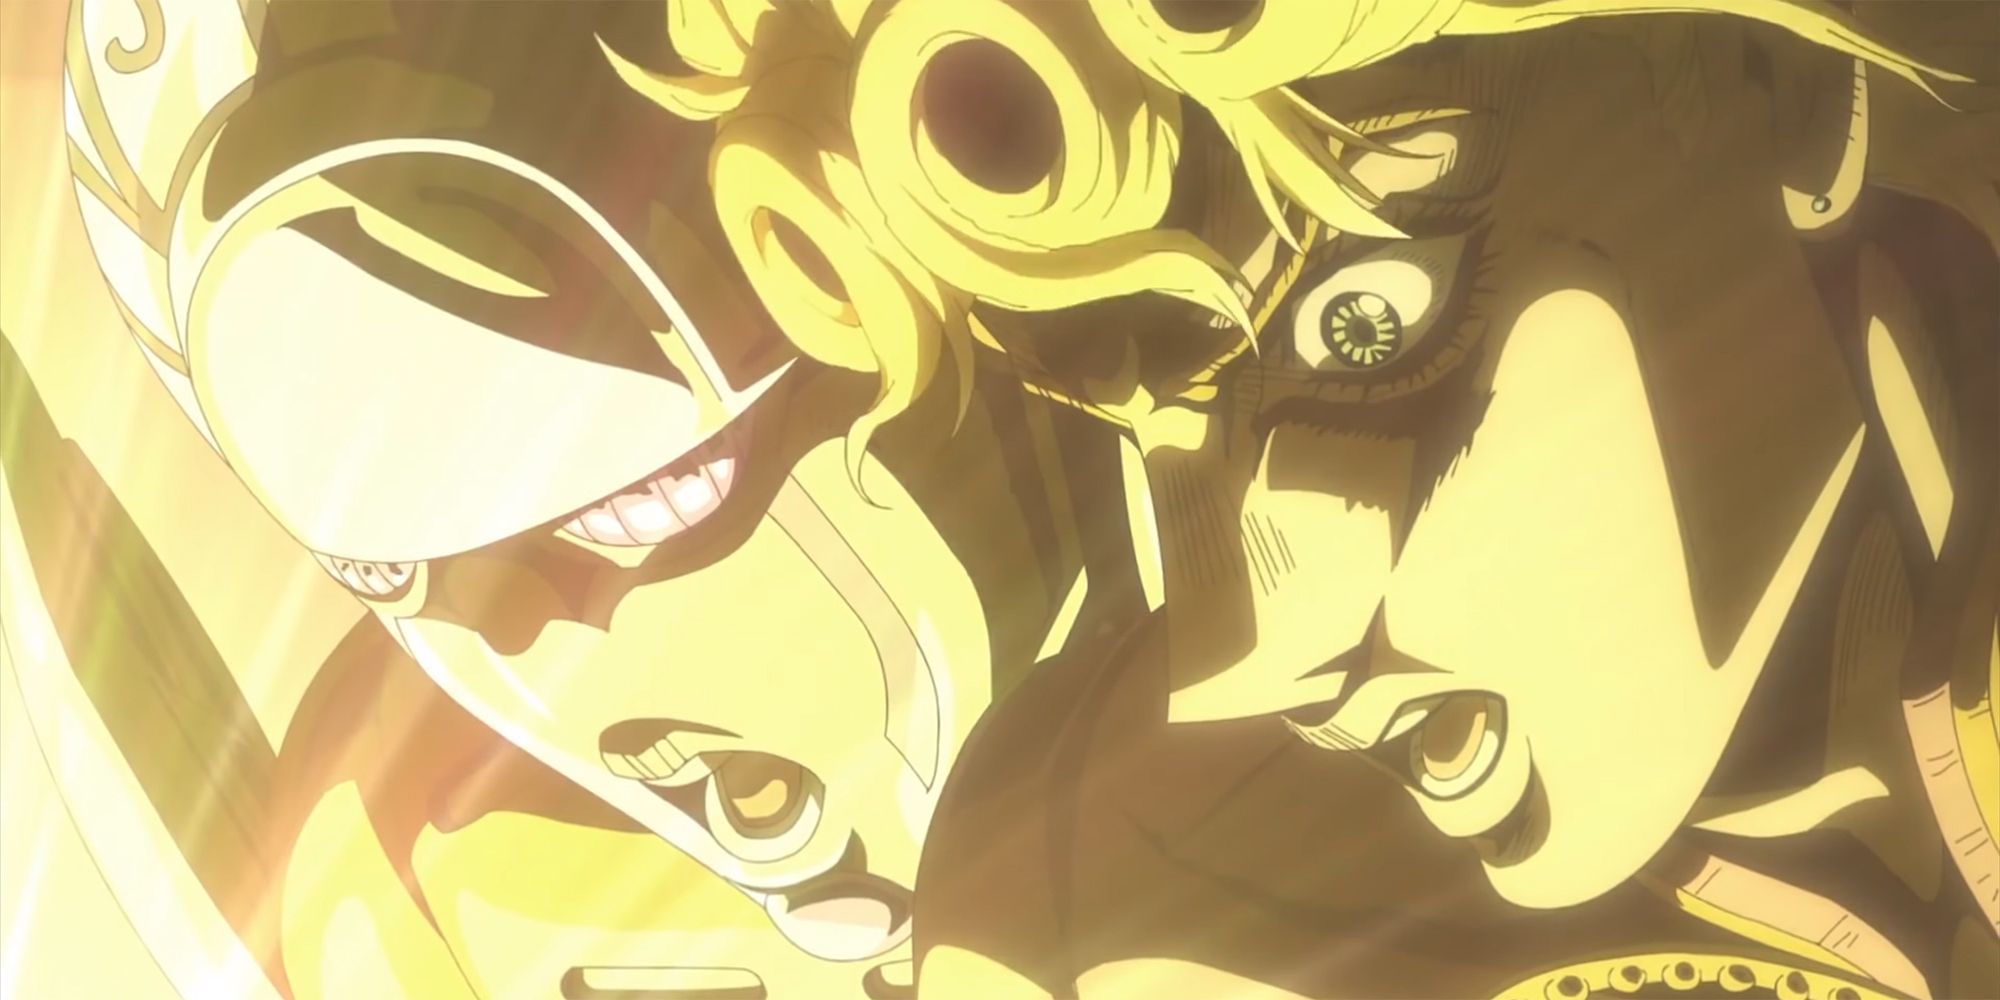 Jojo's Bizzare Adventure - Still Frame From Part 5 OP Traitor's Requiem Of Giorno And Golden Experience Looking At A Bright Glow